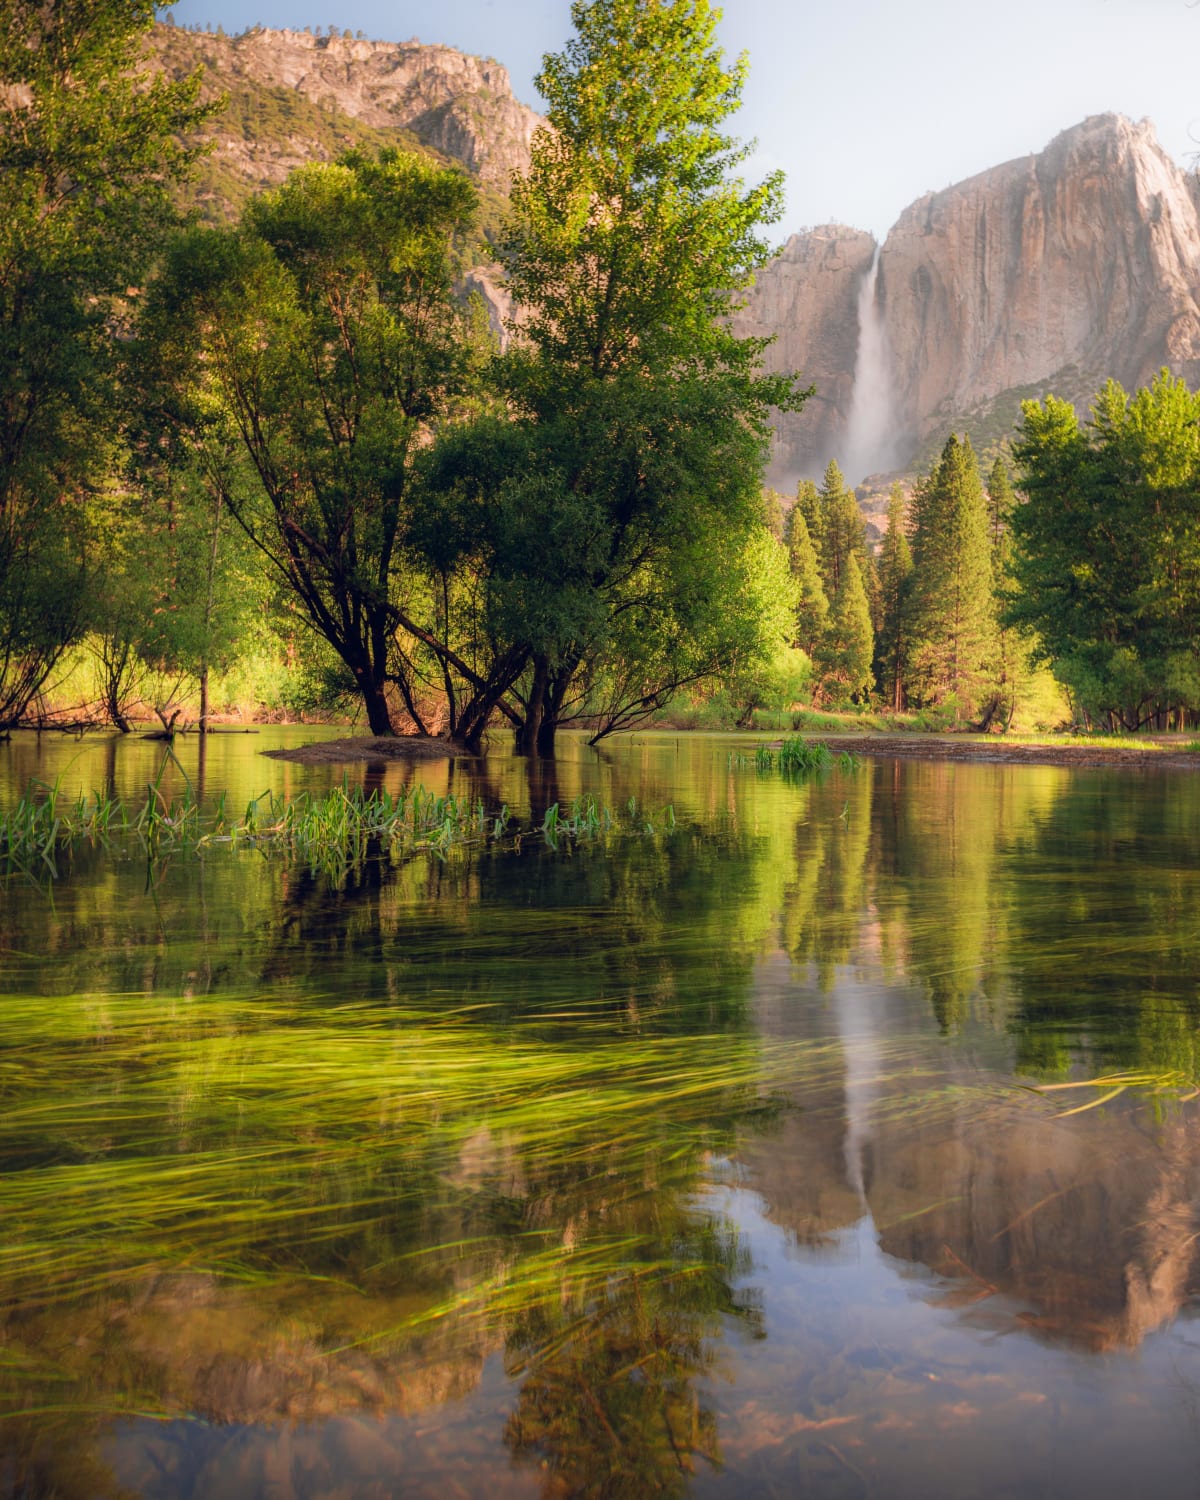 I really enjoyed the way the green came through from under the water, as well as the reflection of Yosemite Falls. Yosemite NP, CA.